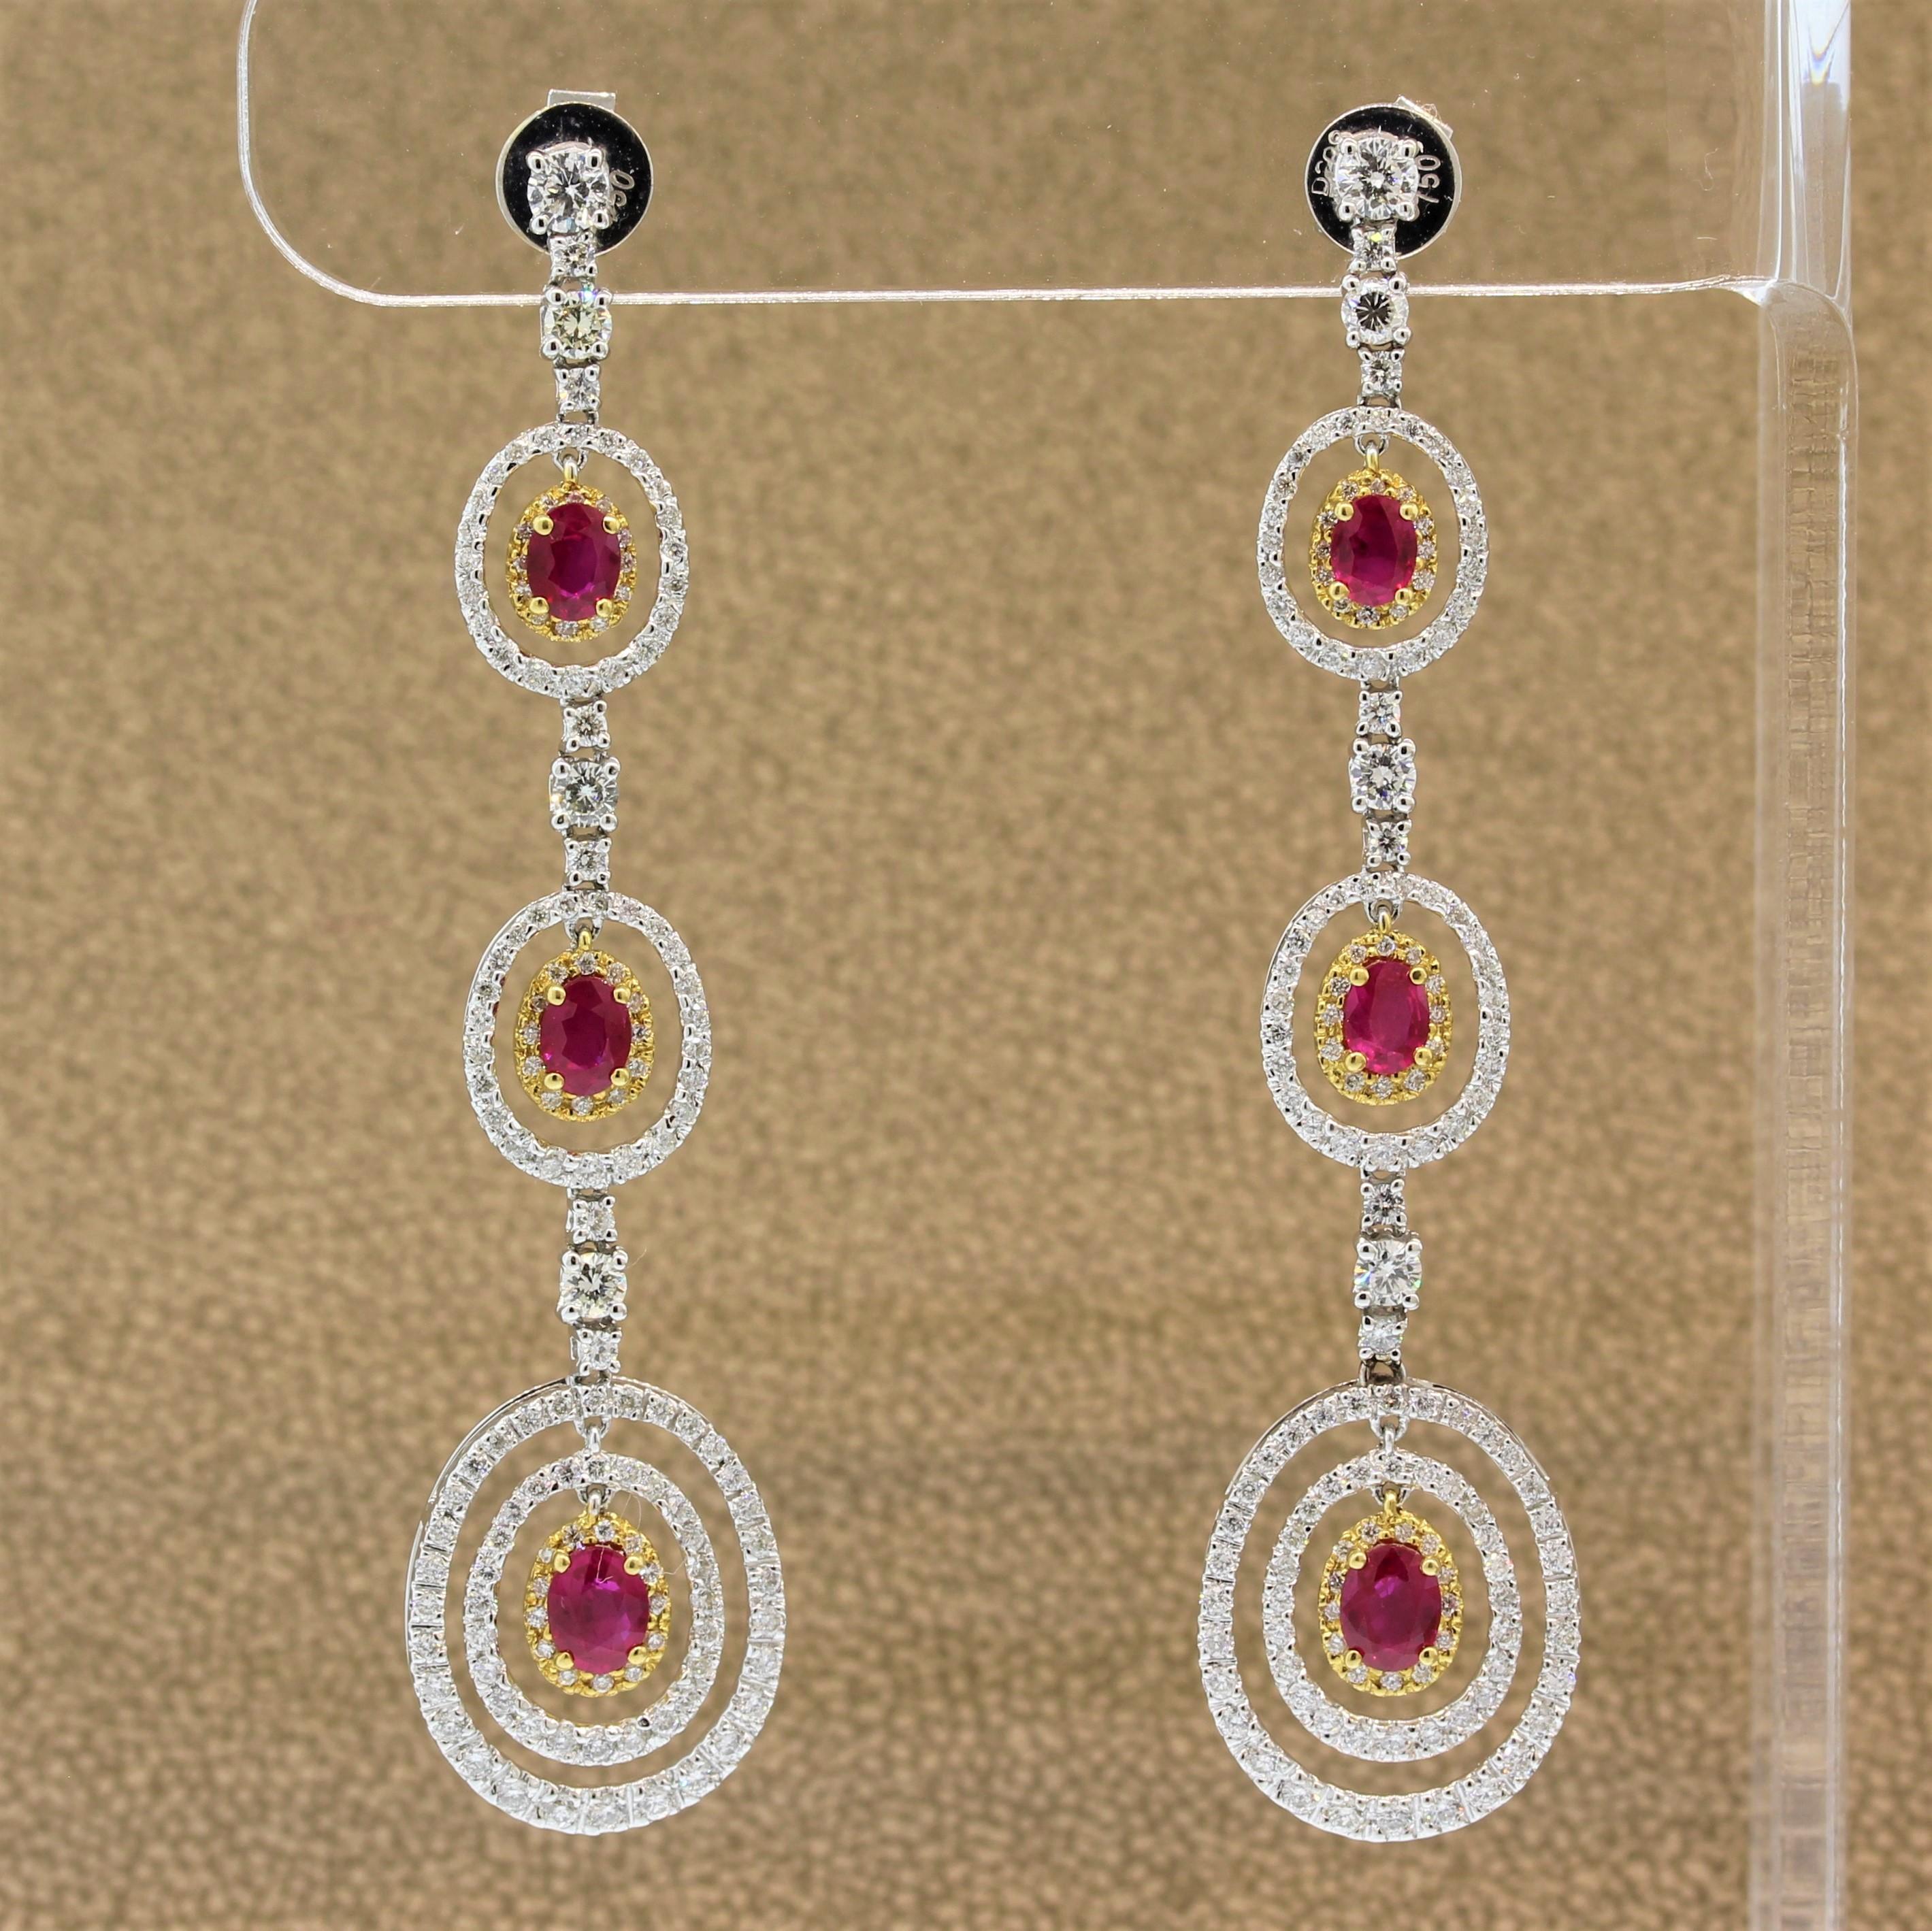 An elegant pair of drop earrings featuring vivid red rubies and round brilliant cut diamonds. There are 1.99 carats of oval shaped rubies set in 18K yellow gold. They are haloed and accented by 2.08 carats of diamonds which are VS in clarity and